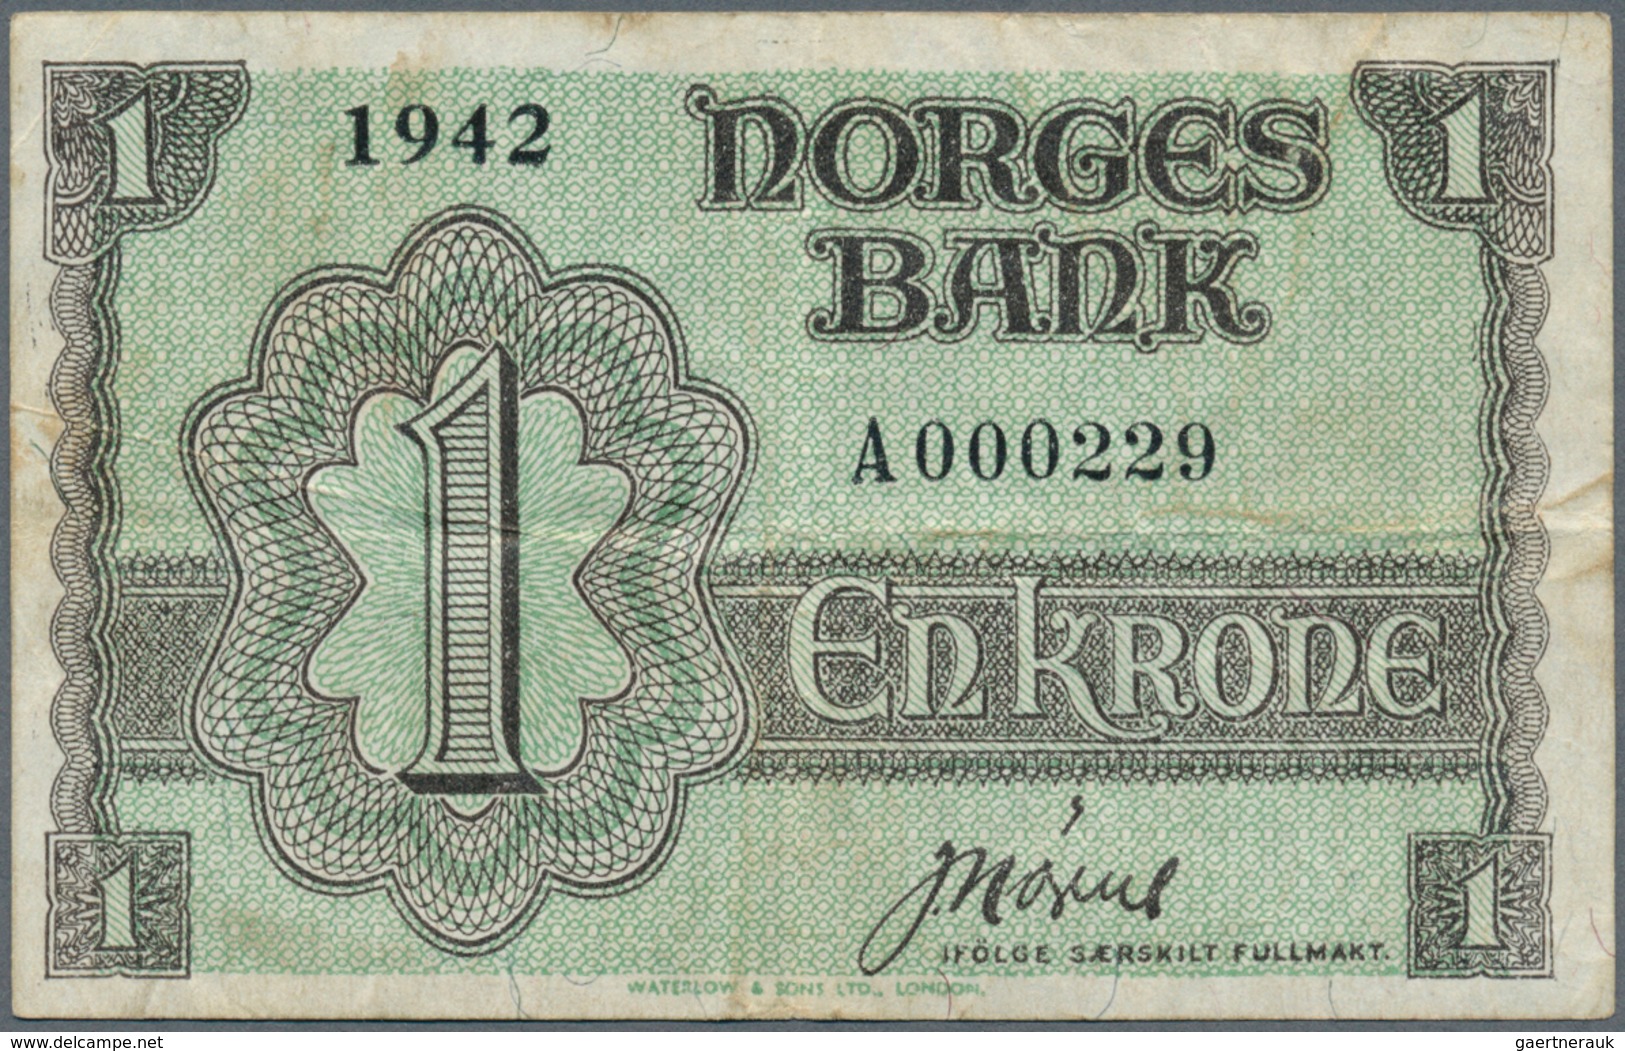 02171 Norway / Norwegen: 1 Krone 1942 P. 17a With Very Low Serial Number #A000229, So This Note Was The 22 - Norway